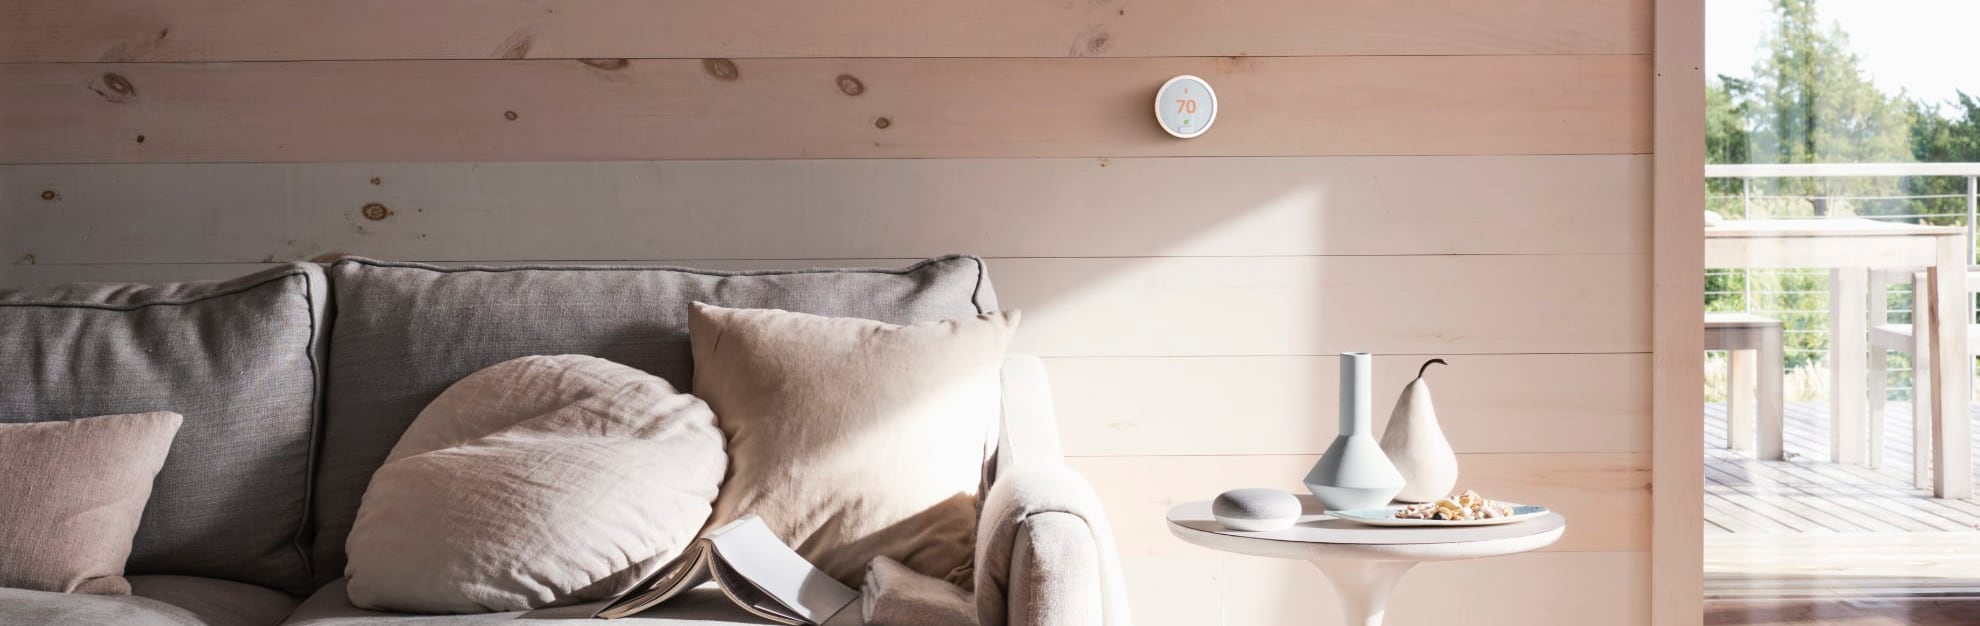 Vivint Home Automation in St. Paul